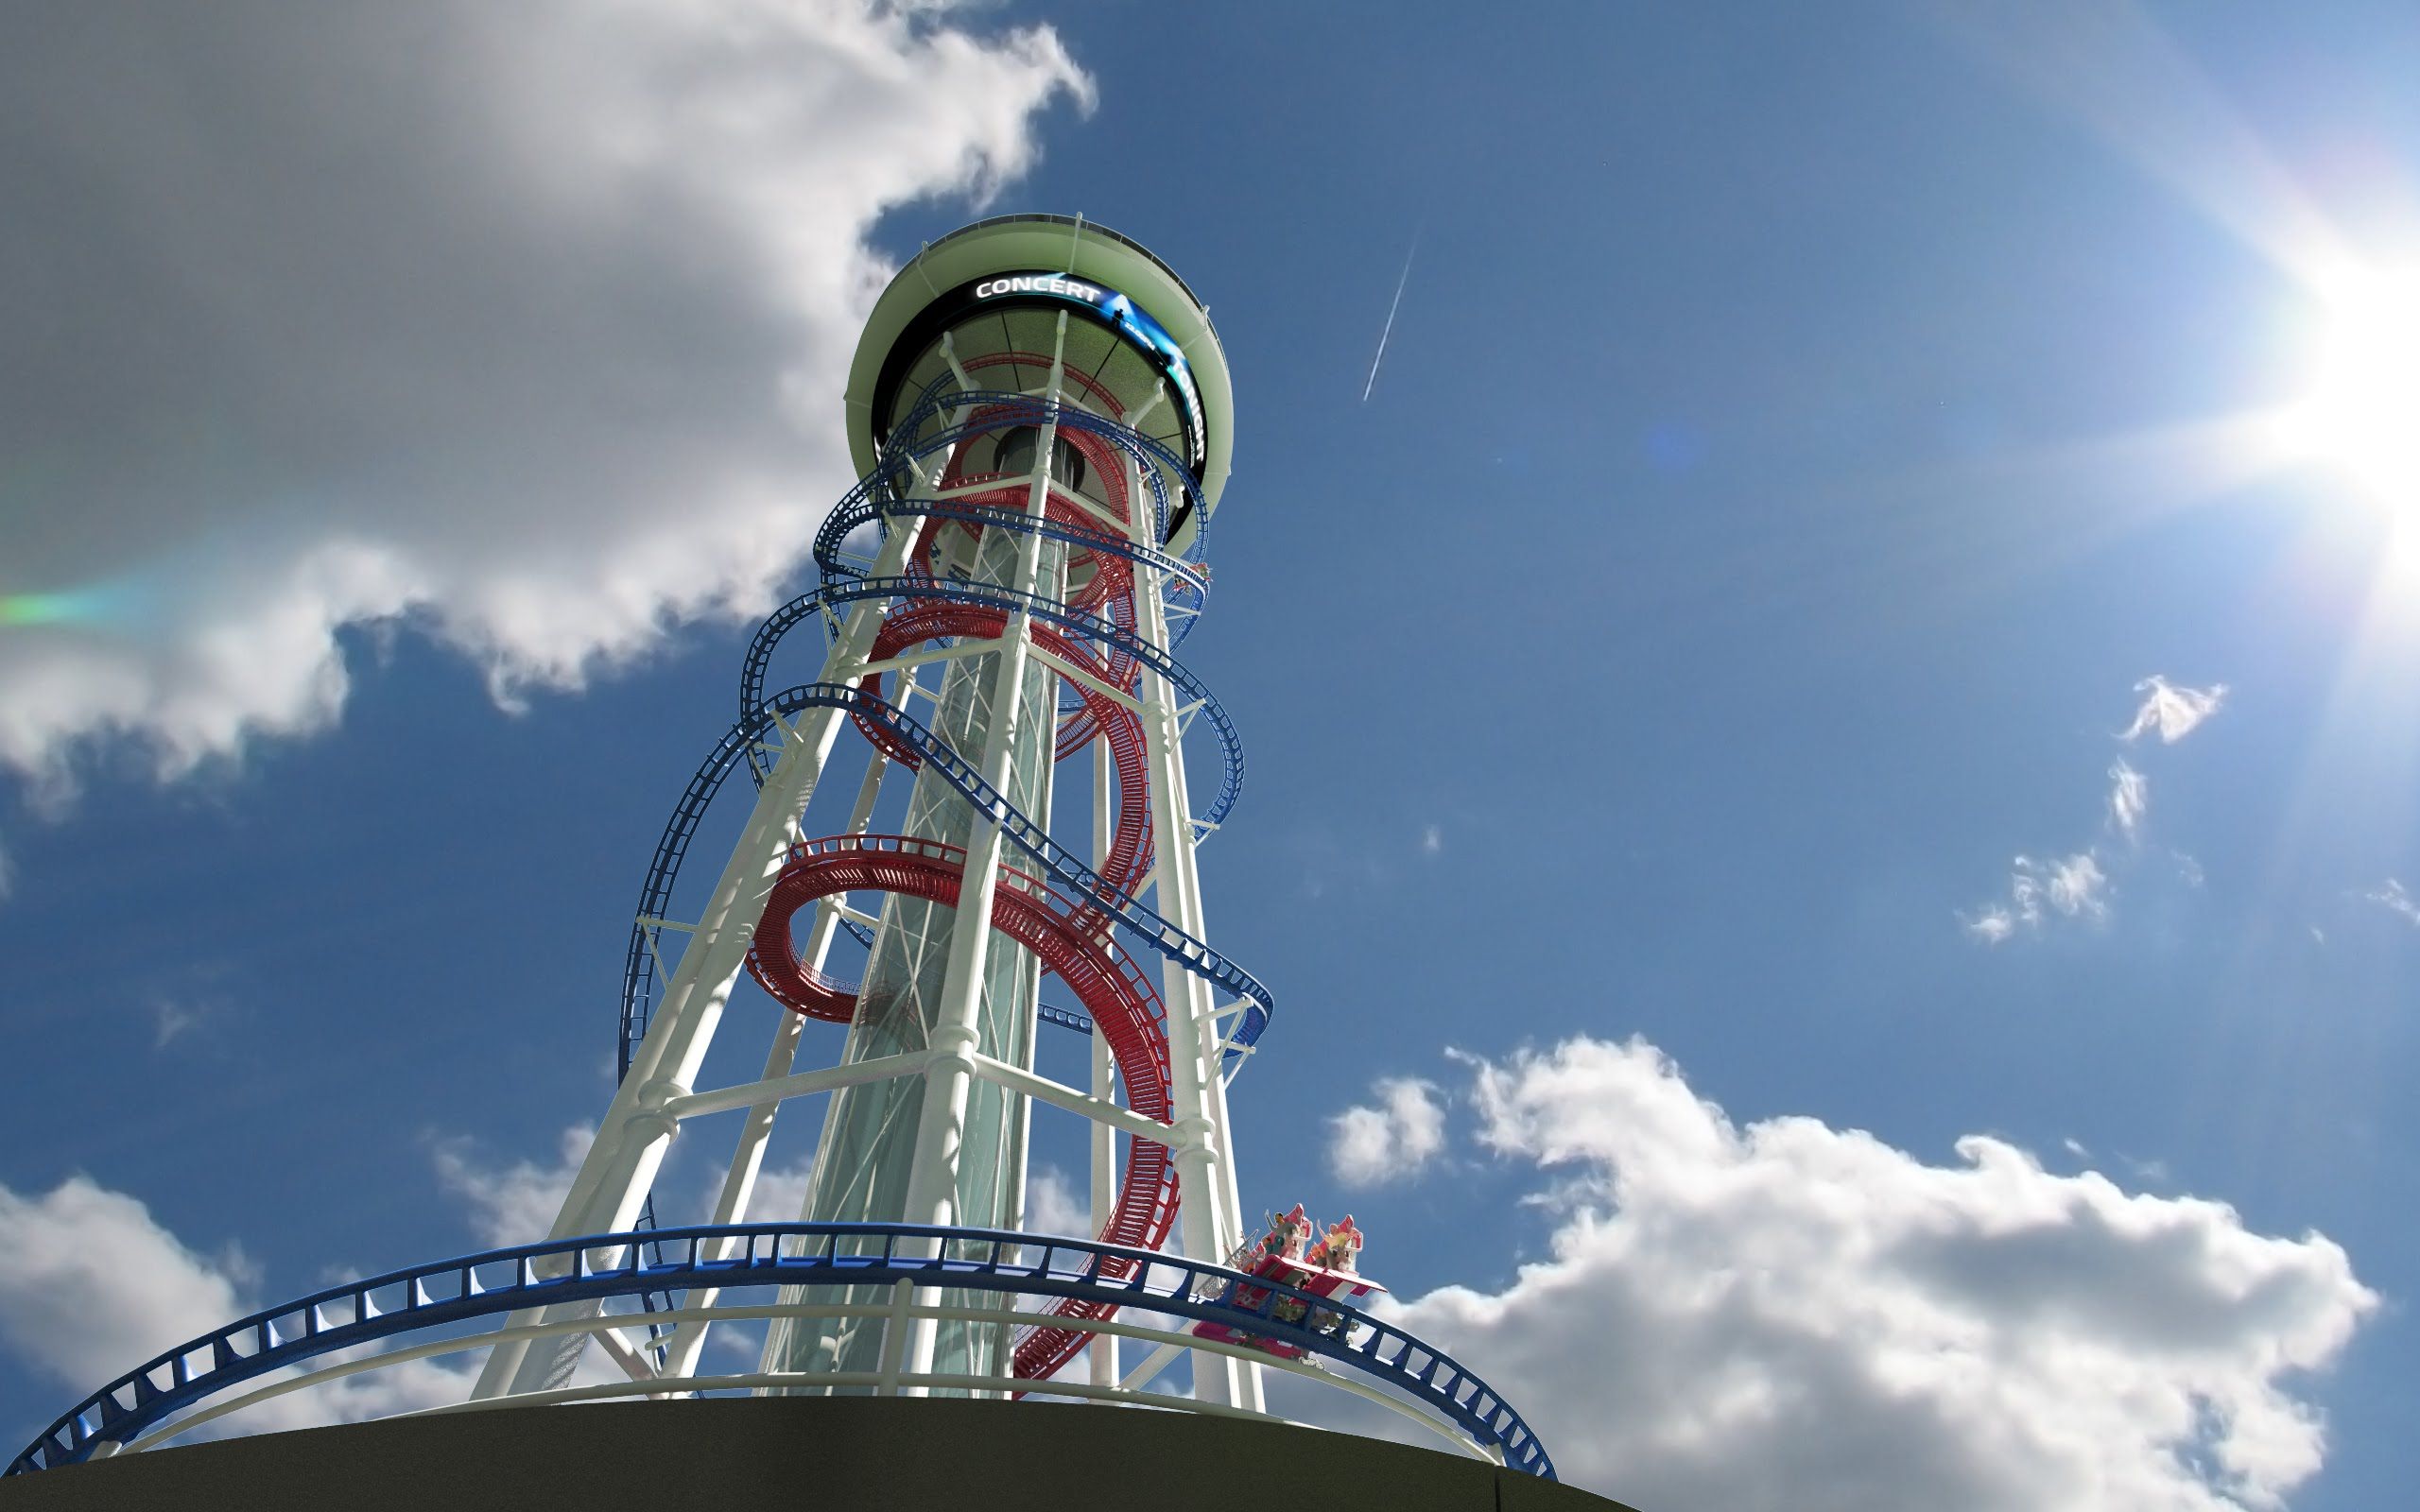 The World's Tallest Roller Coaster Will Make Your Jaw Drop! Standard News